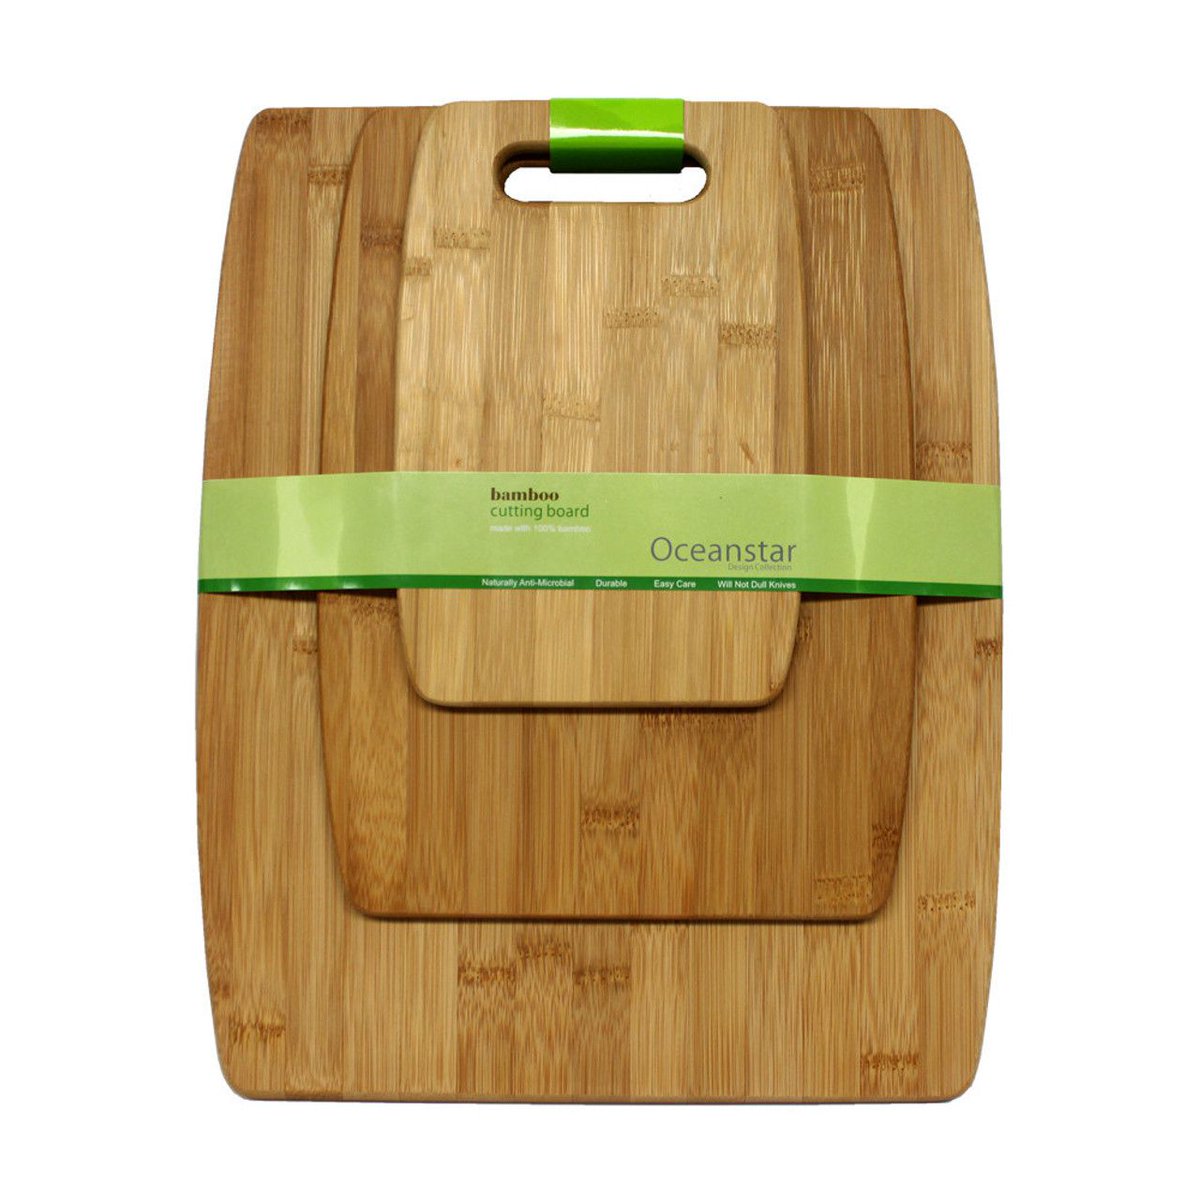 Let's cut it up with this Oceanstar 3-Piece Bamboo Cutting Board Set that's stylish enough to leave out on your counter.
#freeshipping  #cookfresh
https://bklynma ...